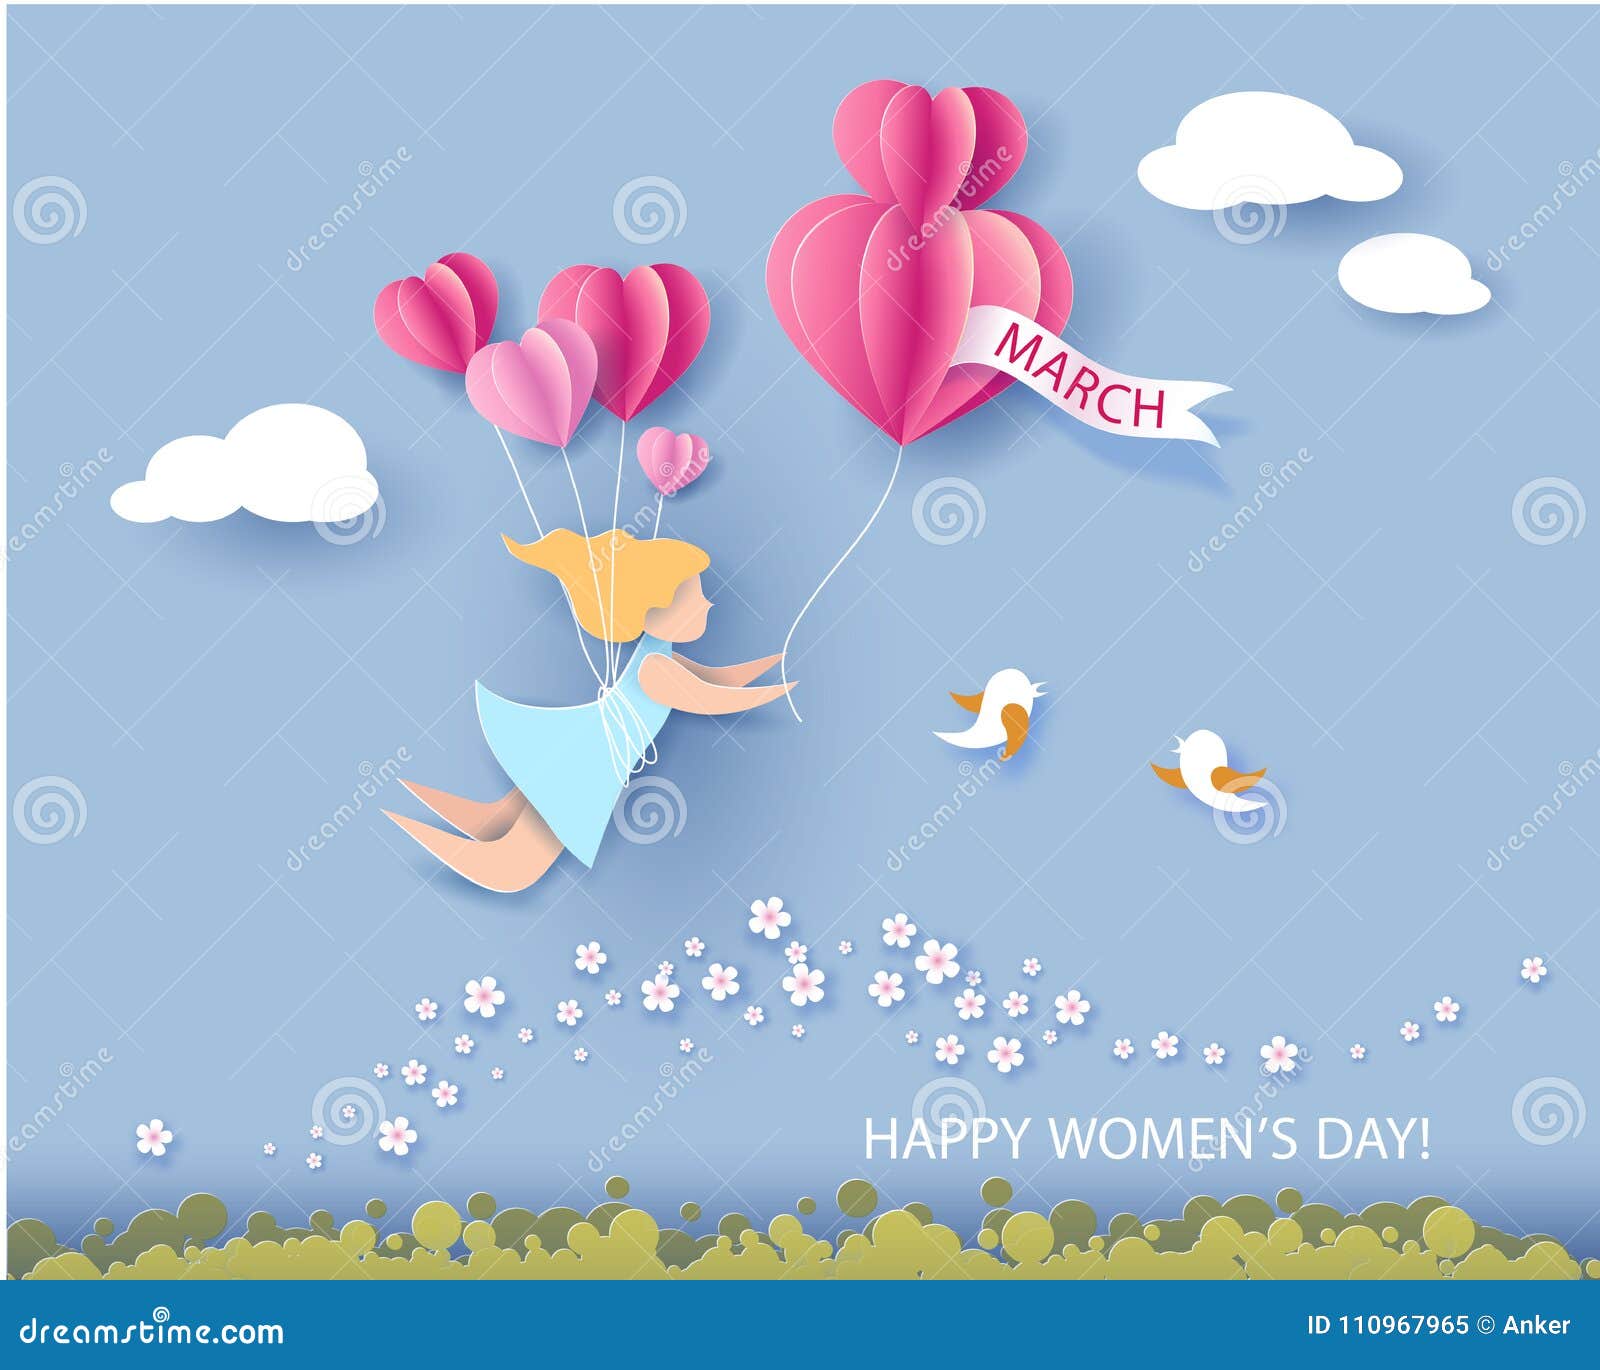 card for 8 march womens day.